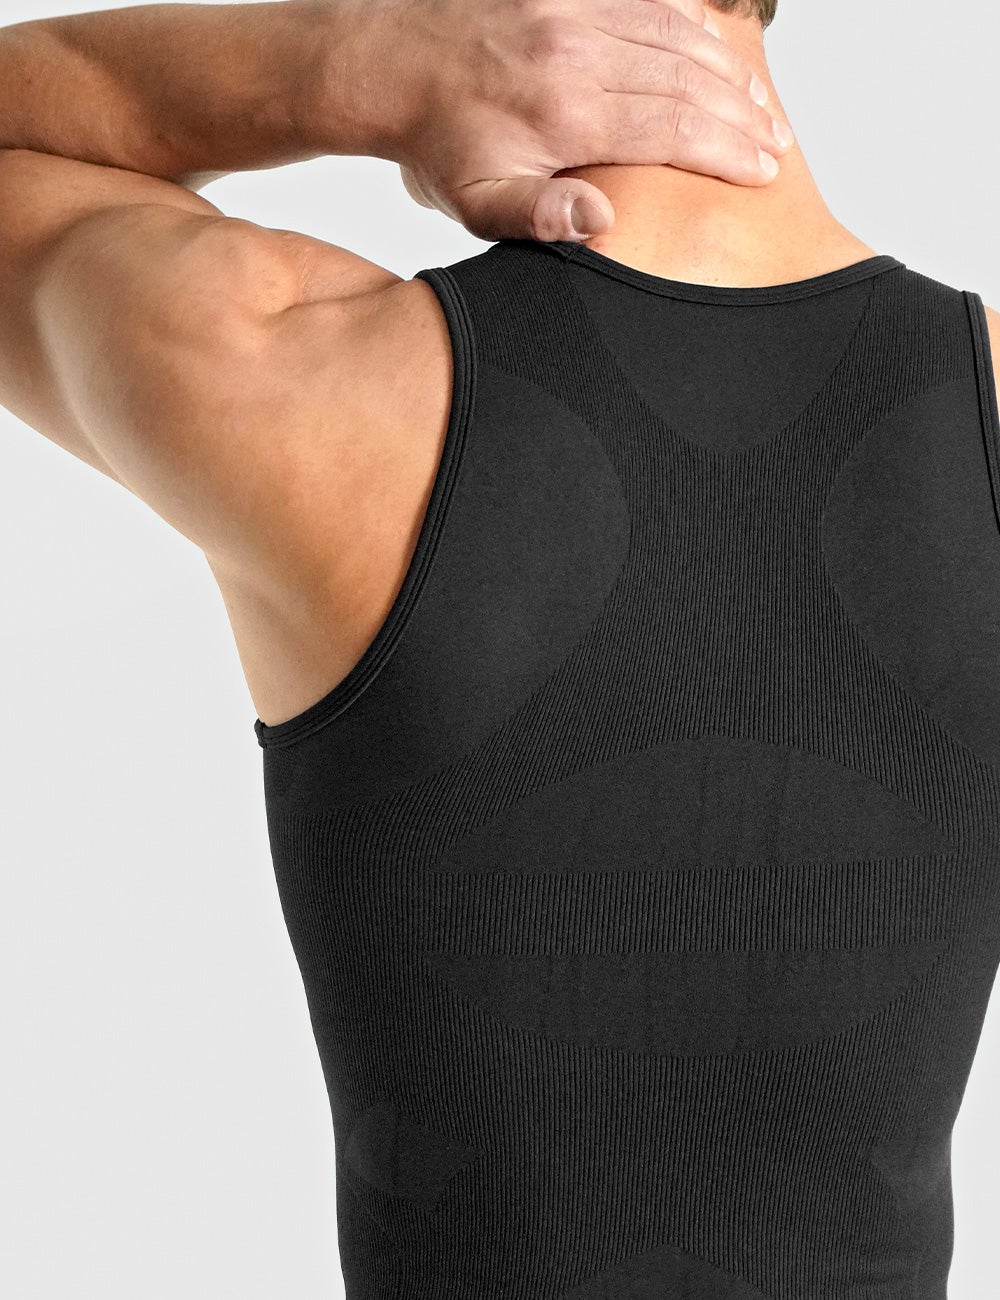 Men's Midweight Seamless Compression Sleeveless Top